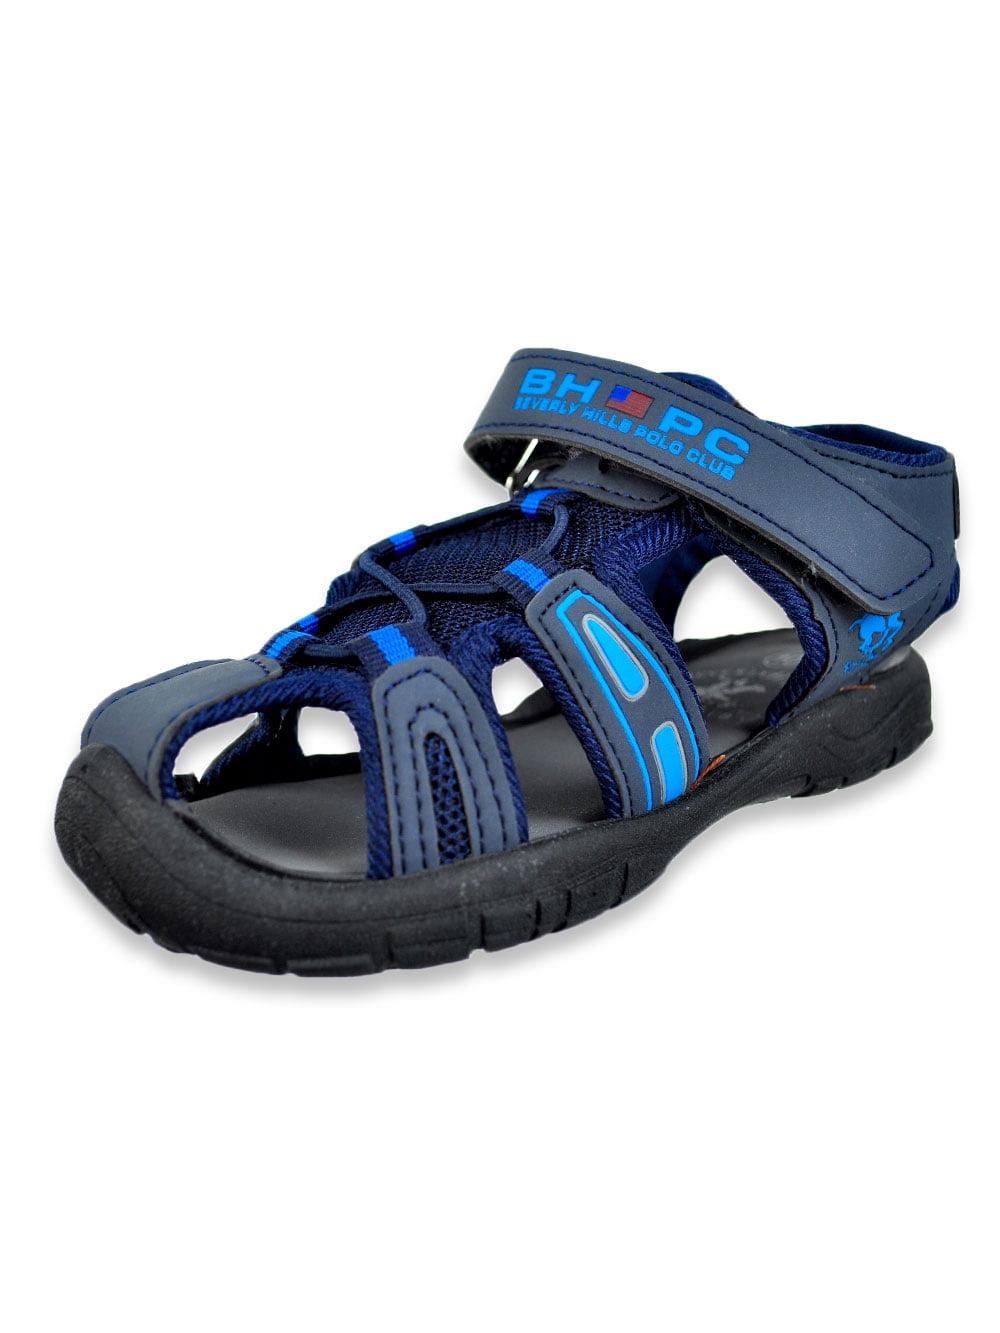 Beverly Hills Polo Club Boys' Sandals Toddler/Little Kid/Big Kid Closed Toe Sports Sandals 